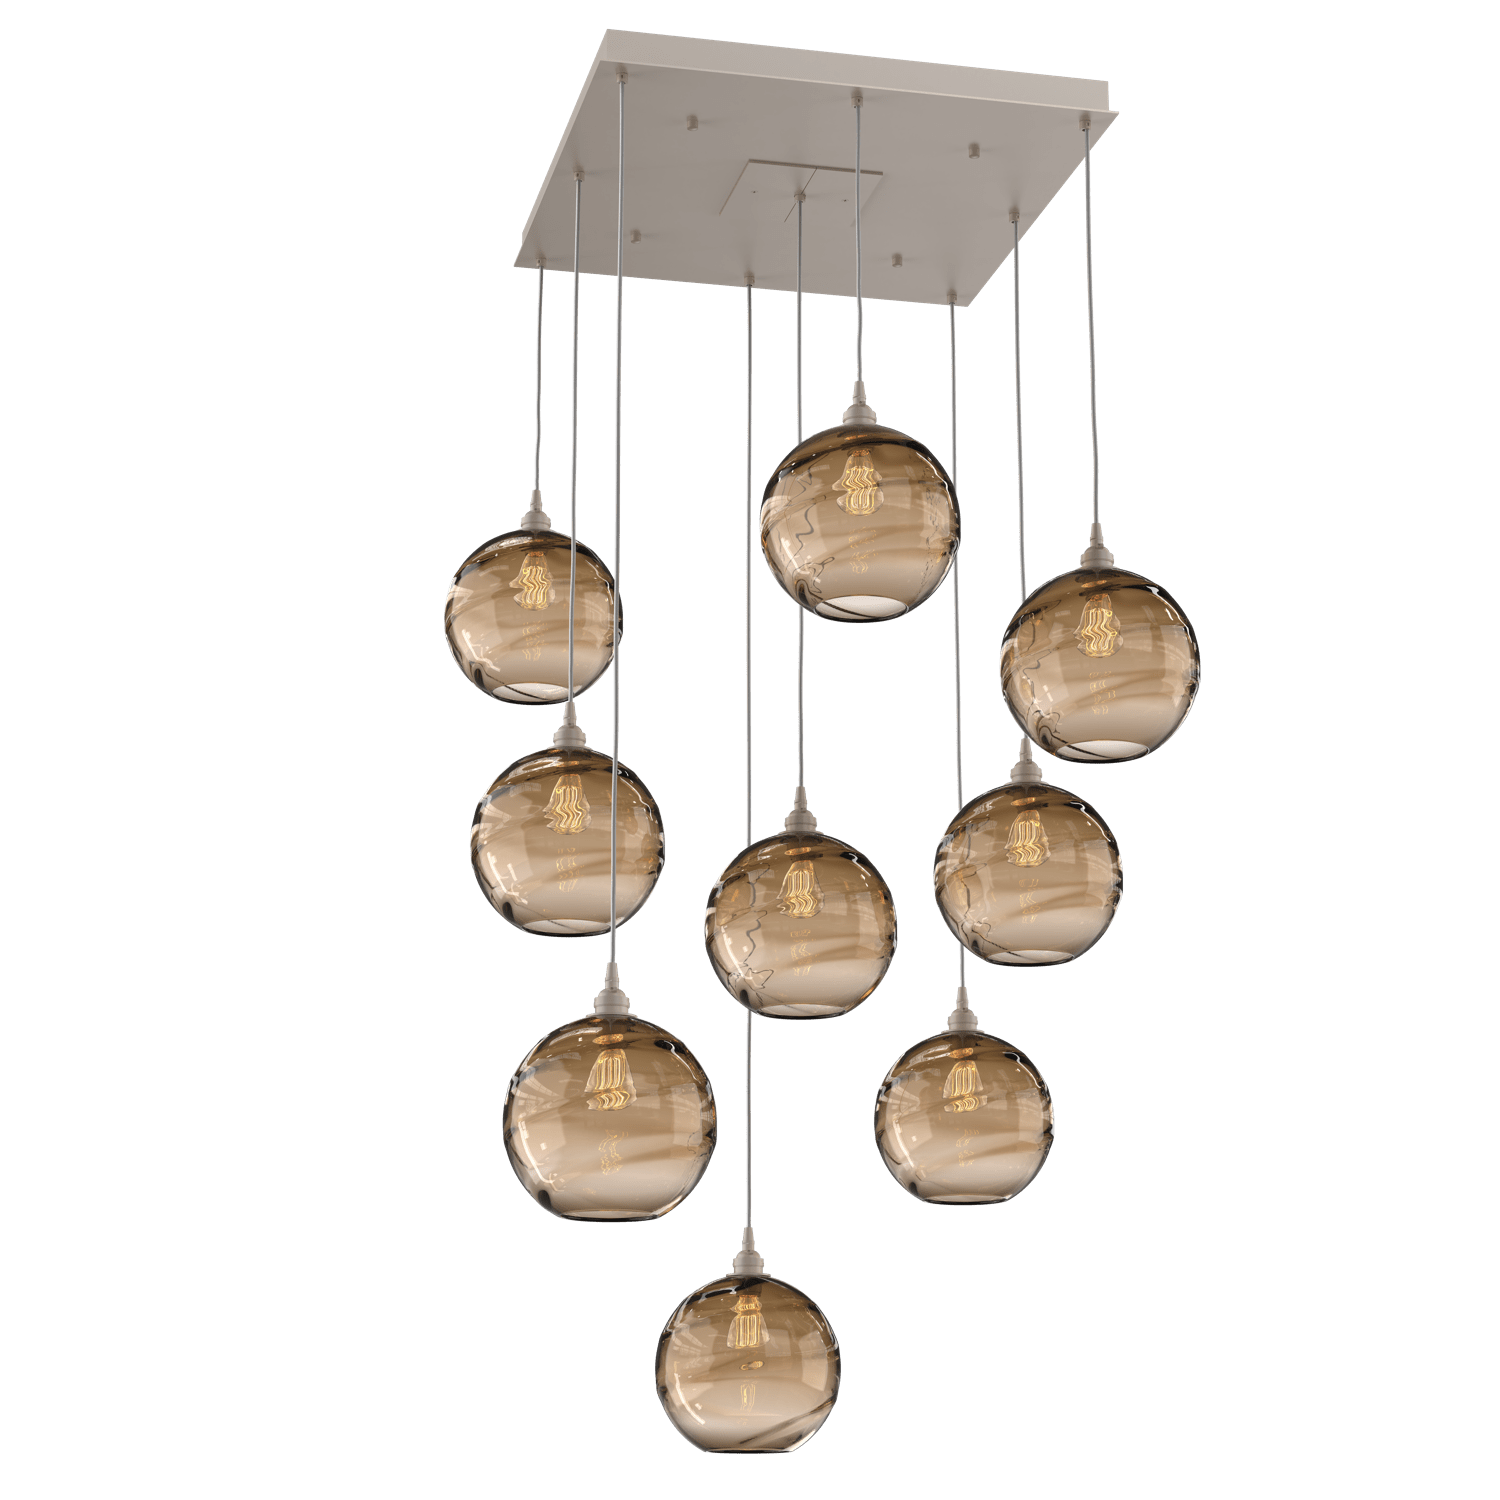 CHB0047-09-BS-OB-Hammerton-Studio-Optic-Blown-Glass-Terra-9-light-square-pendant-chandelier-with-metallic-beige-silver-finish-and-optic-bronze-blown-glass-shades-and-incandescent-lamping